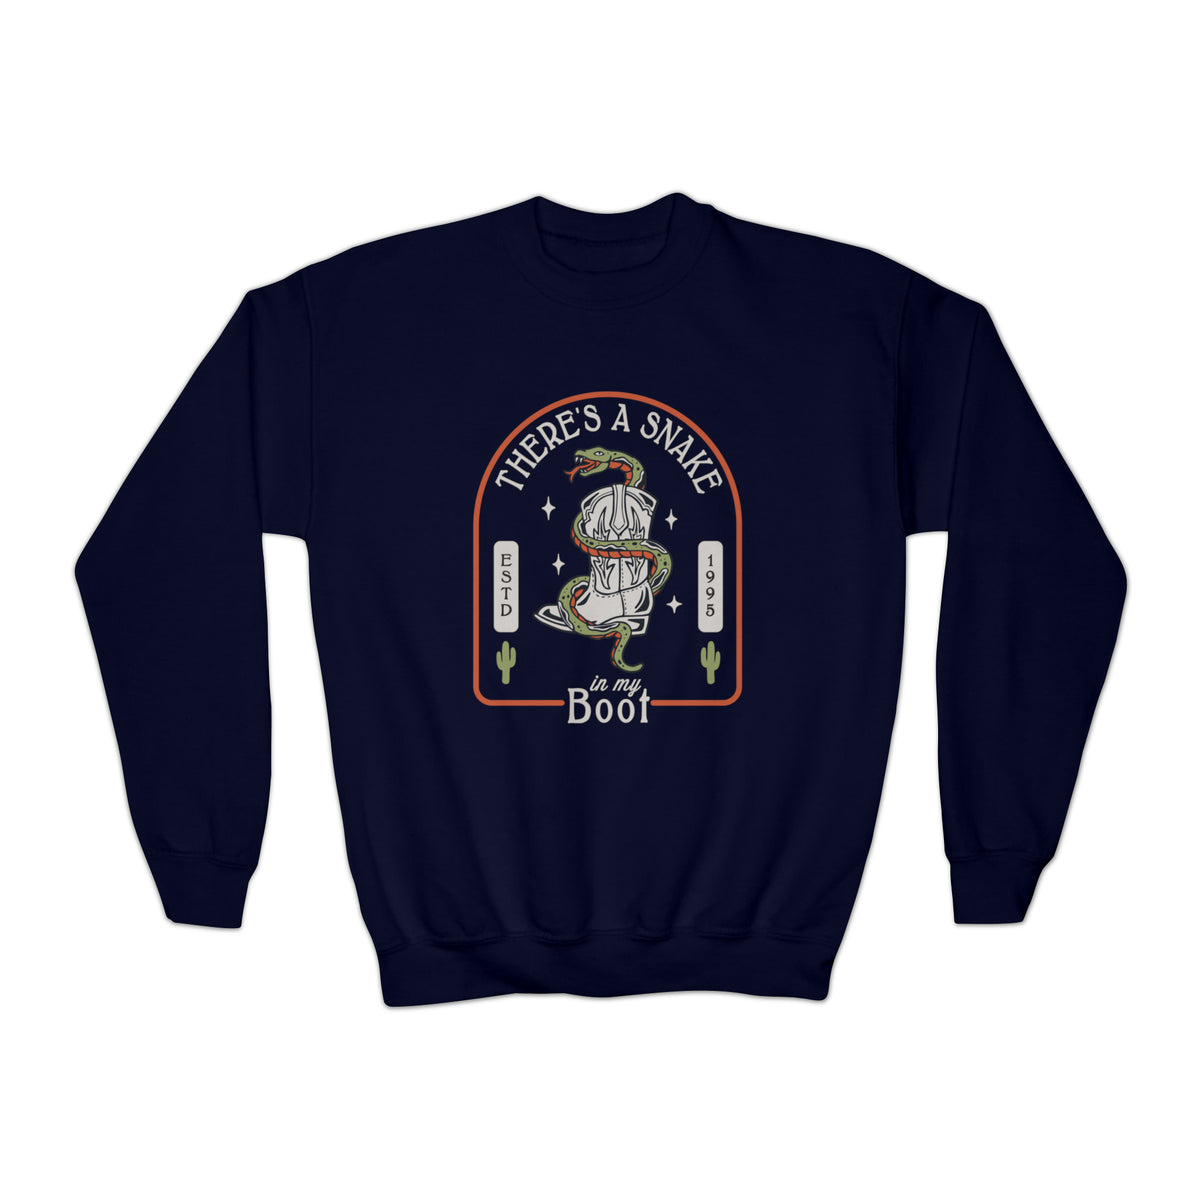 There's A Snake In My Boot Gildan Youth Crewneck Sweatshirt